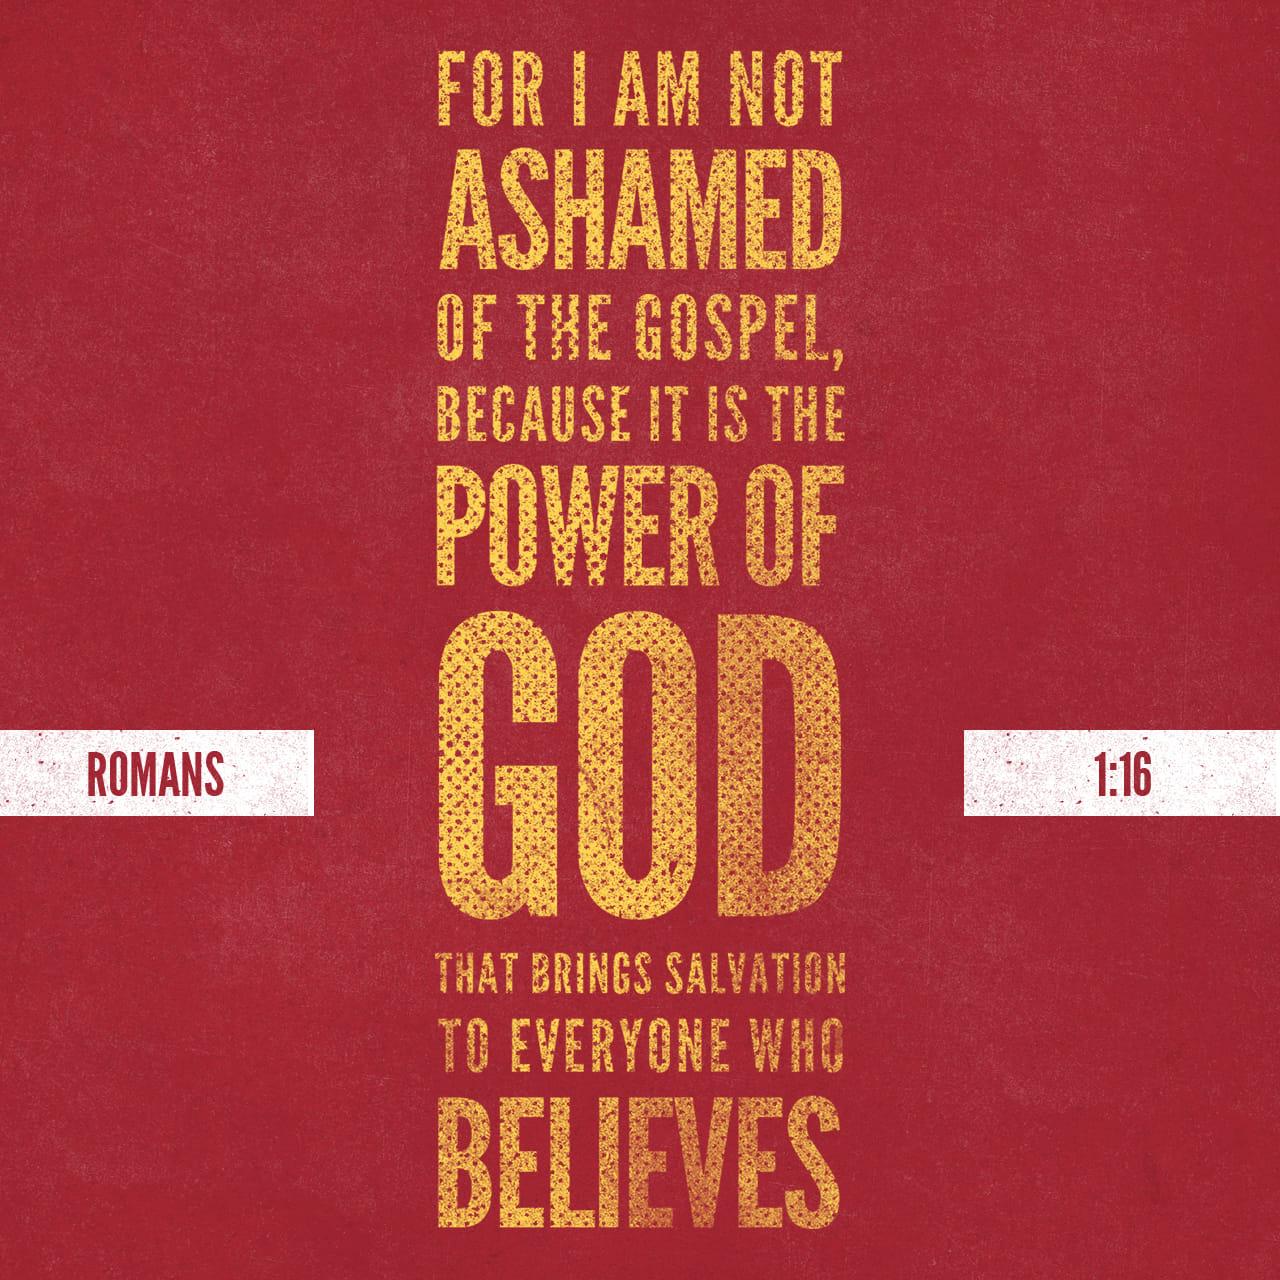 Bible Verse of the Day - day 90 - image 308 (Romans 1:1-17)